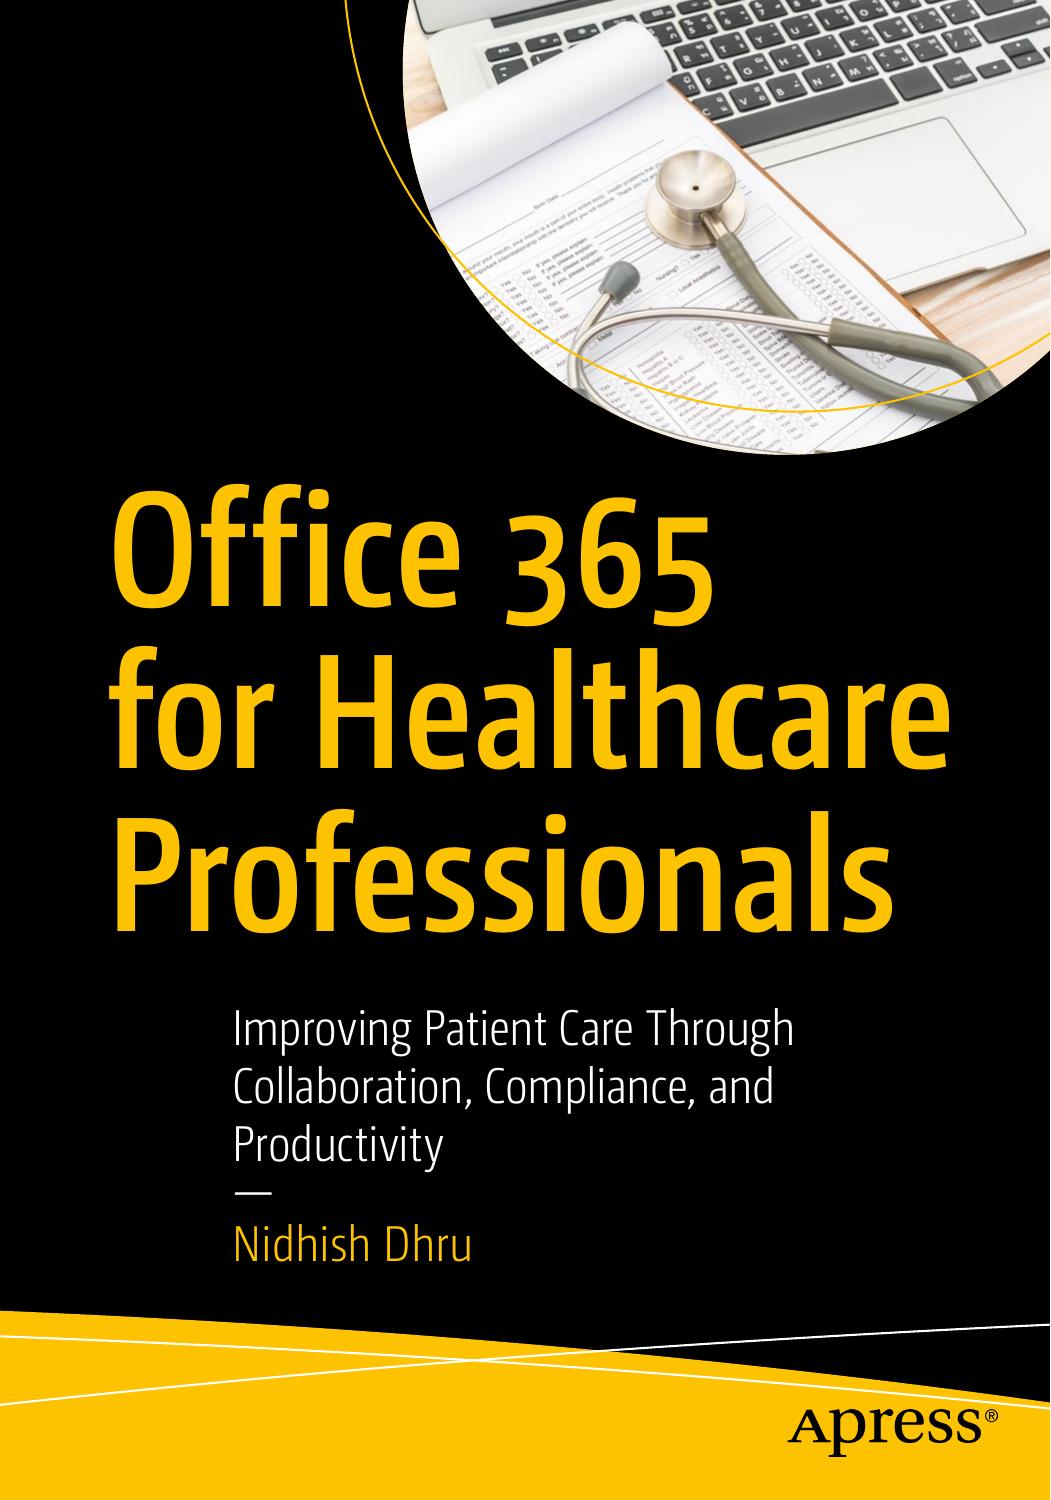 Office 365 for Healthcare Professionals by Nidhish Dhru